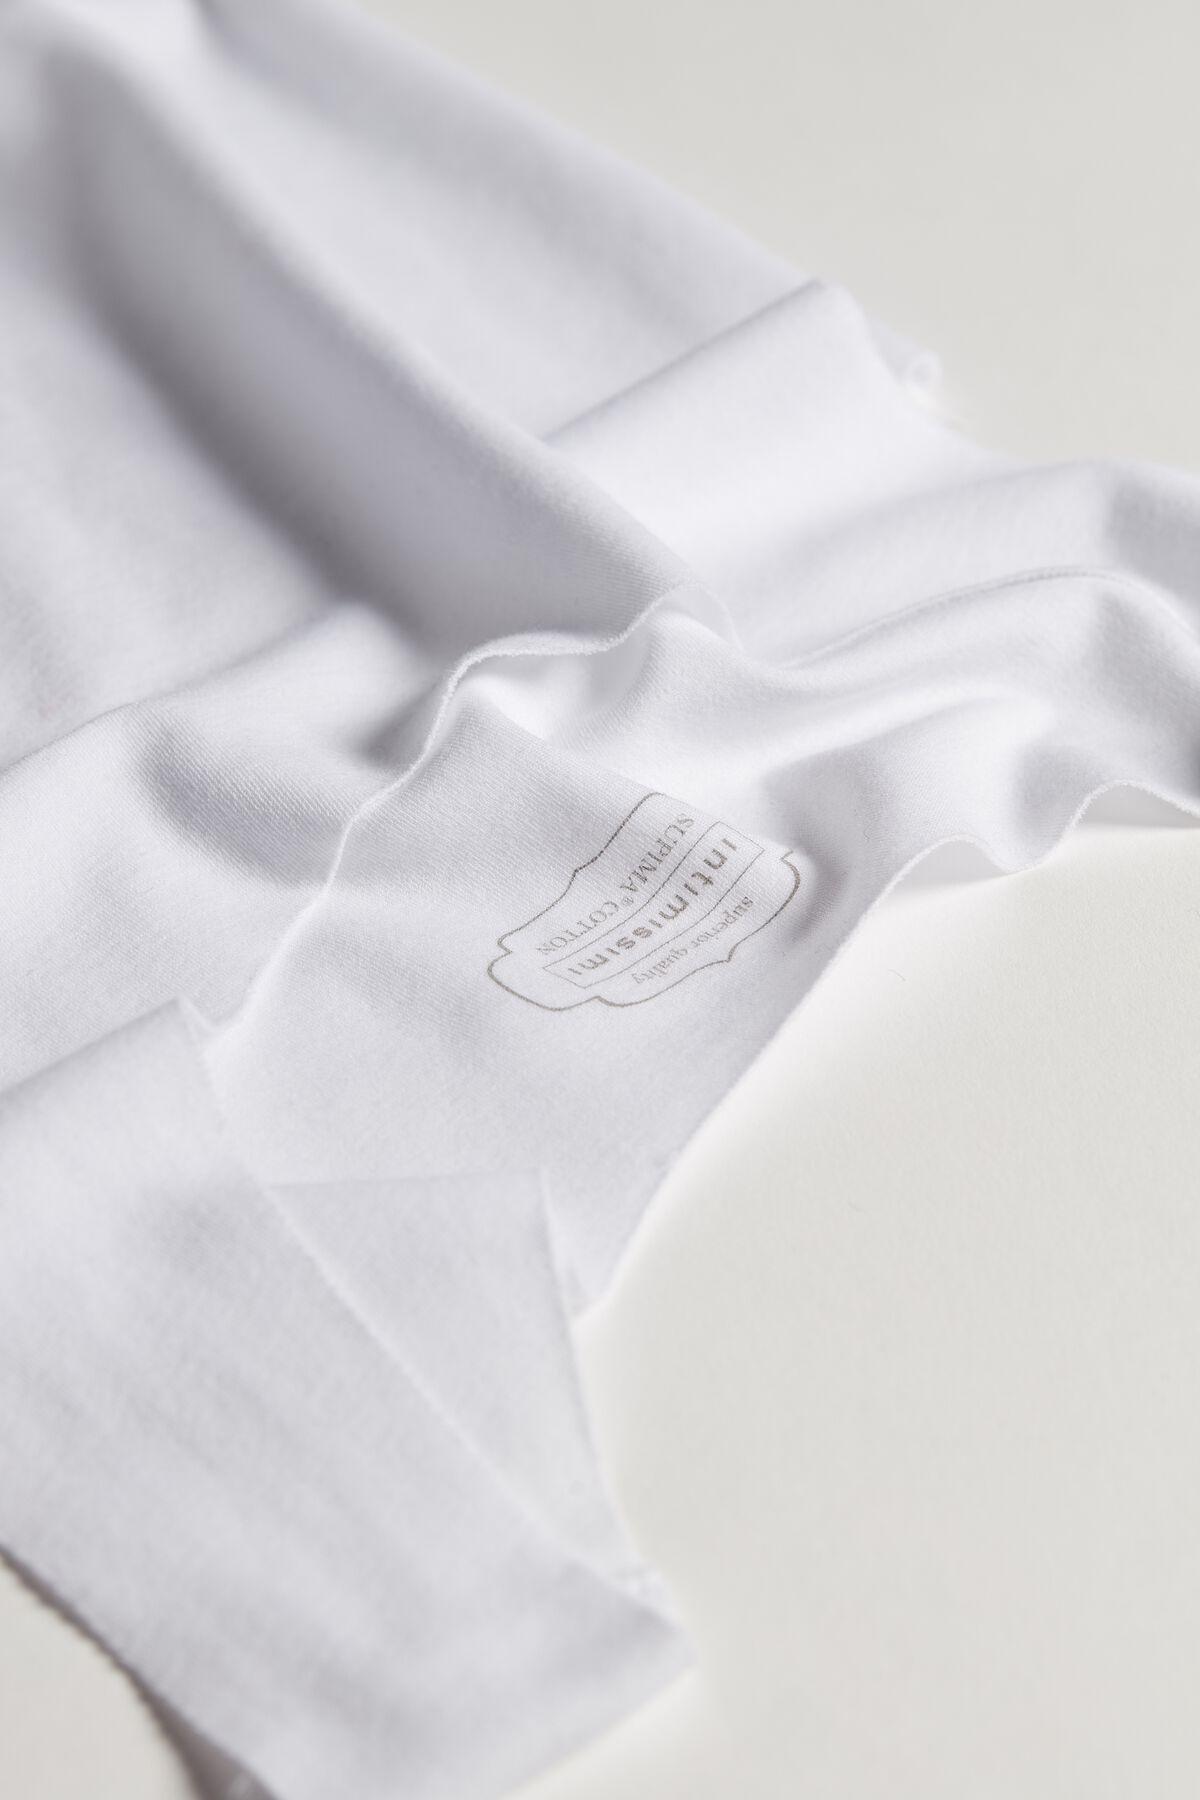 Intimissimi - White Top Made From Ribbed Supima Cotton